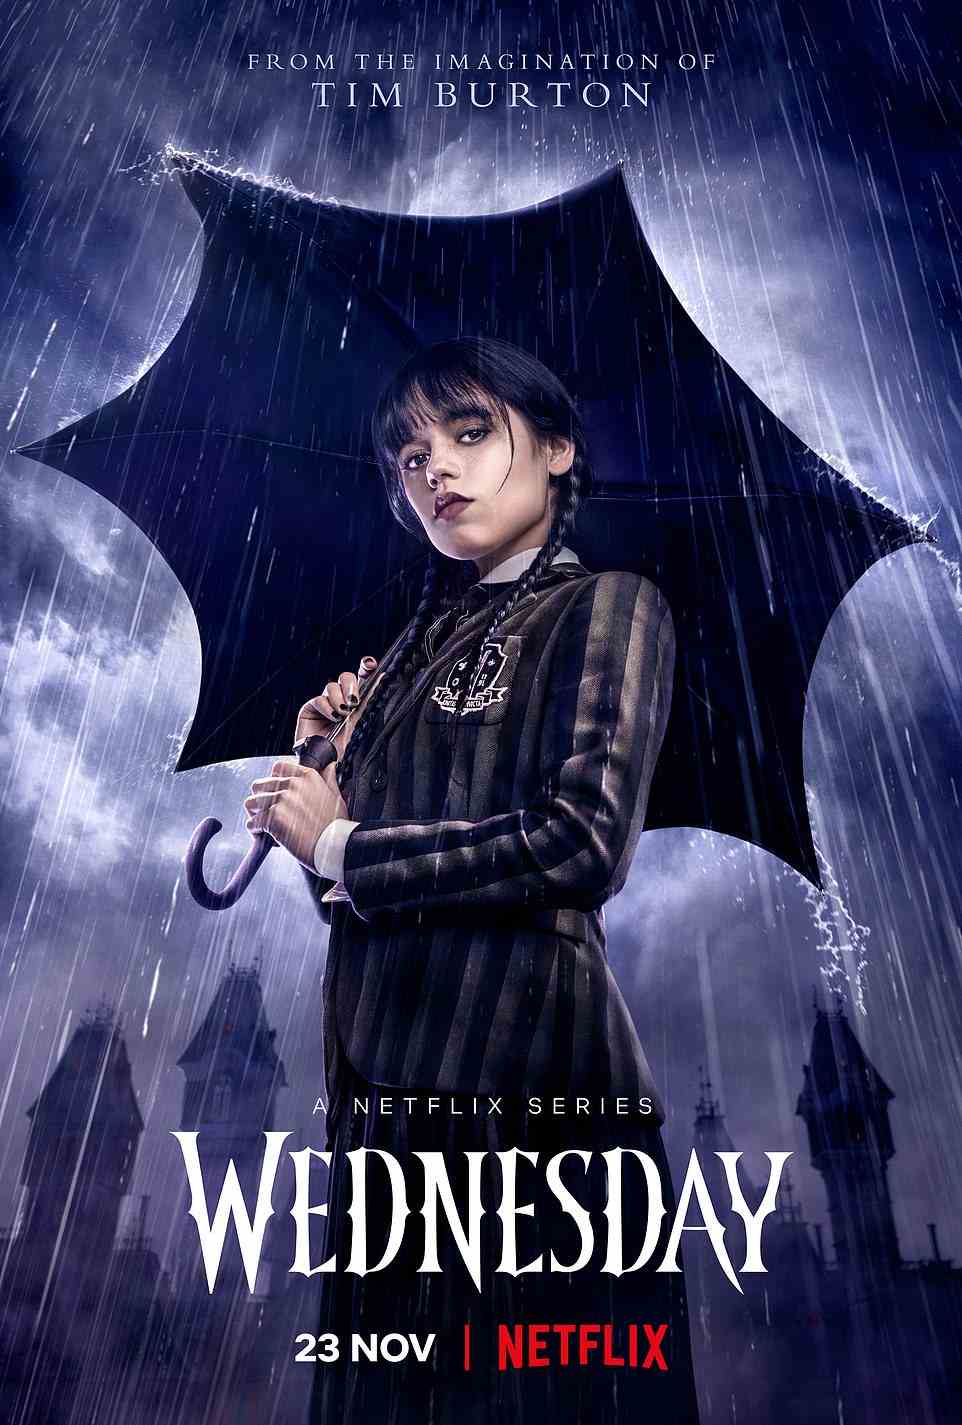 Jenna Ortega stole millions of hearts with her portrayal of Wednesday Addams in Netflix's brand new Tim Burton-directed series Wednesday - and the 20-year-old star certainly worked hard to get where she is now